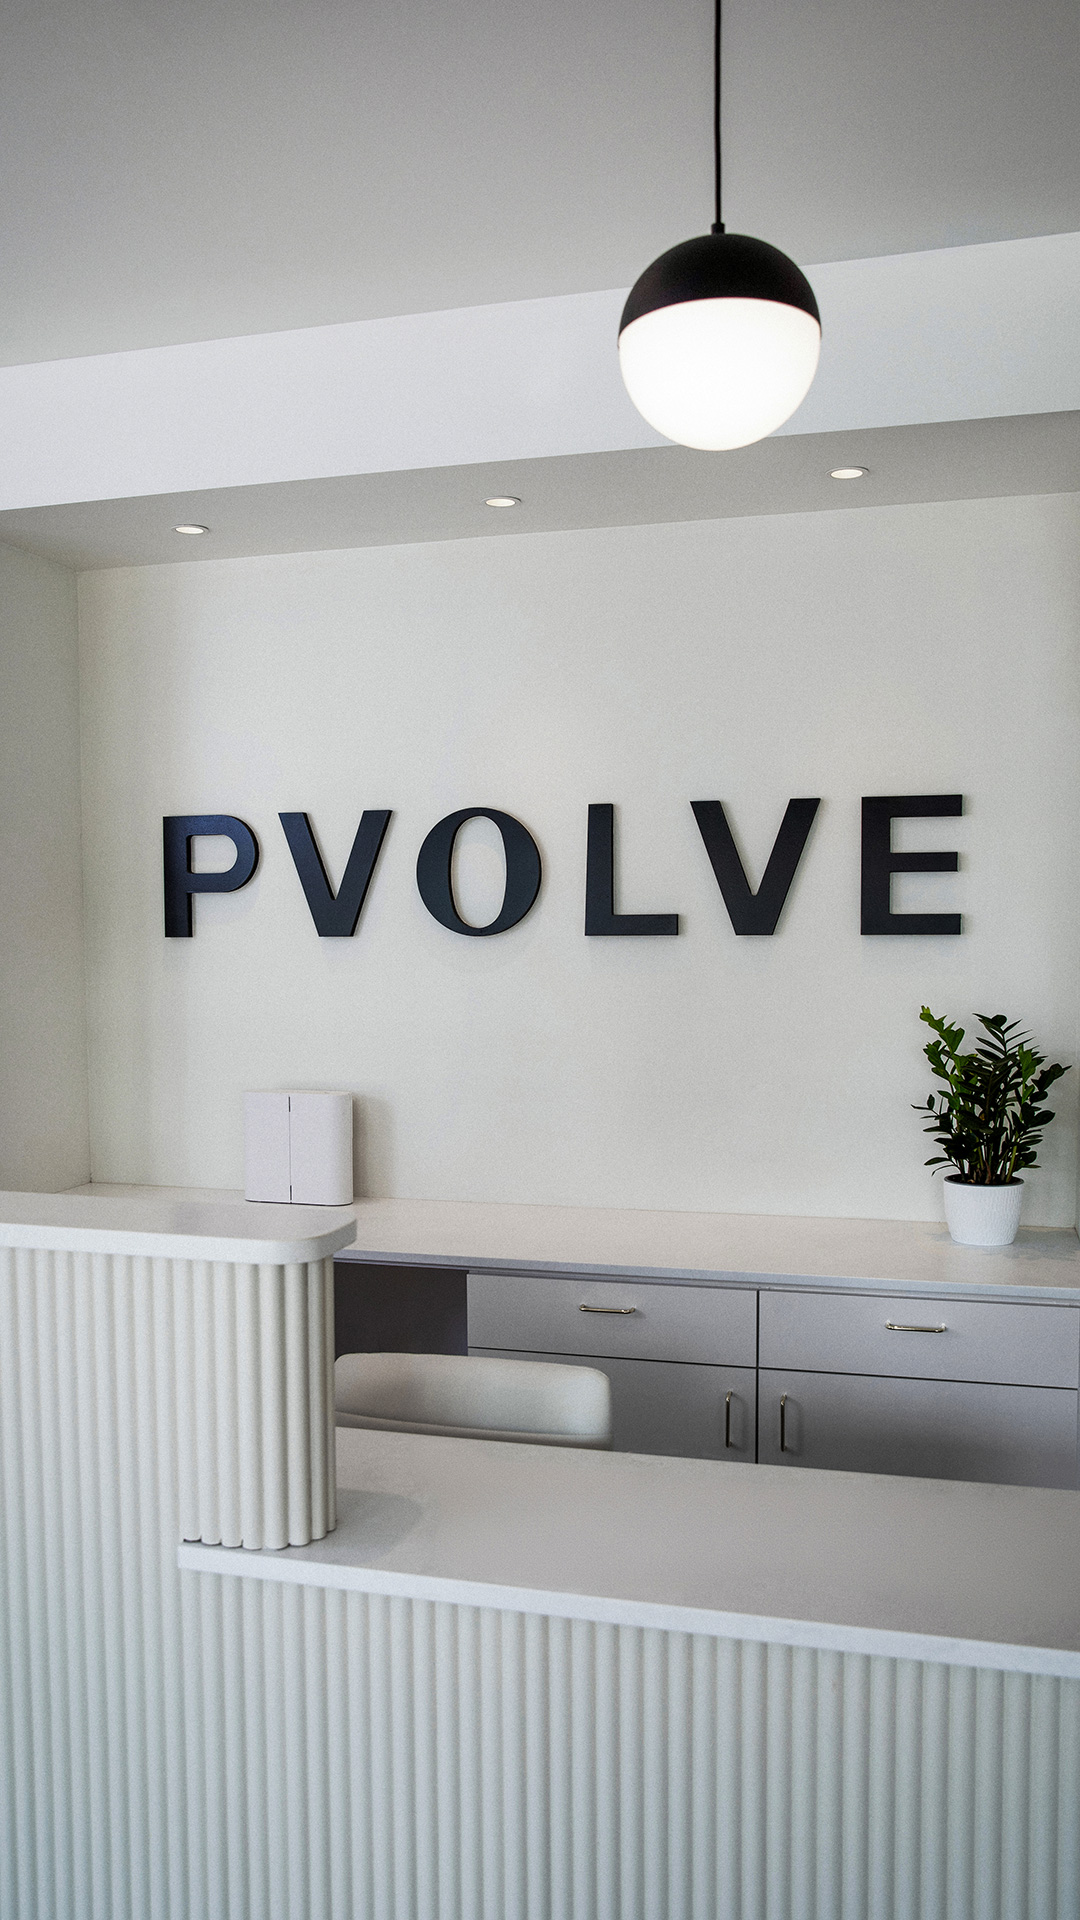 Pvolve Front Desk with logo